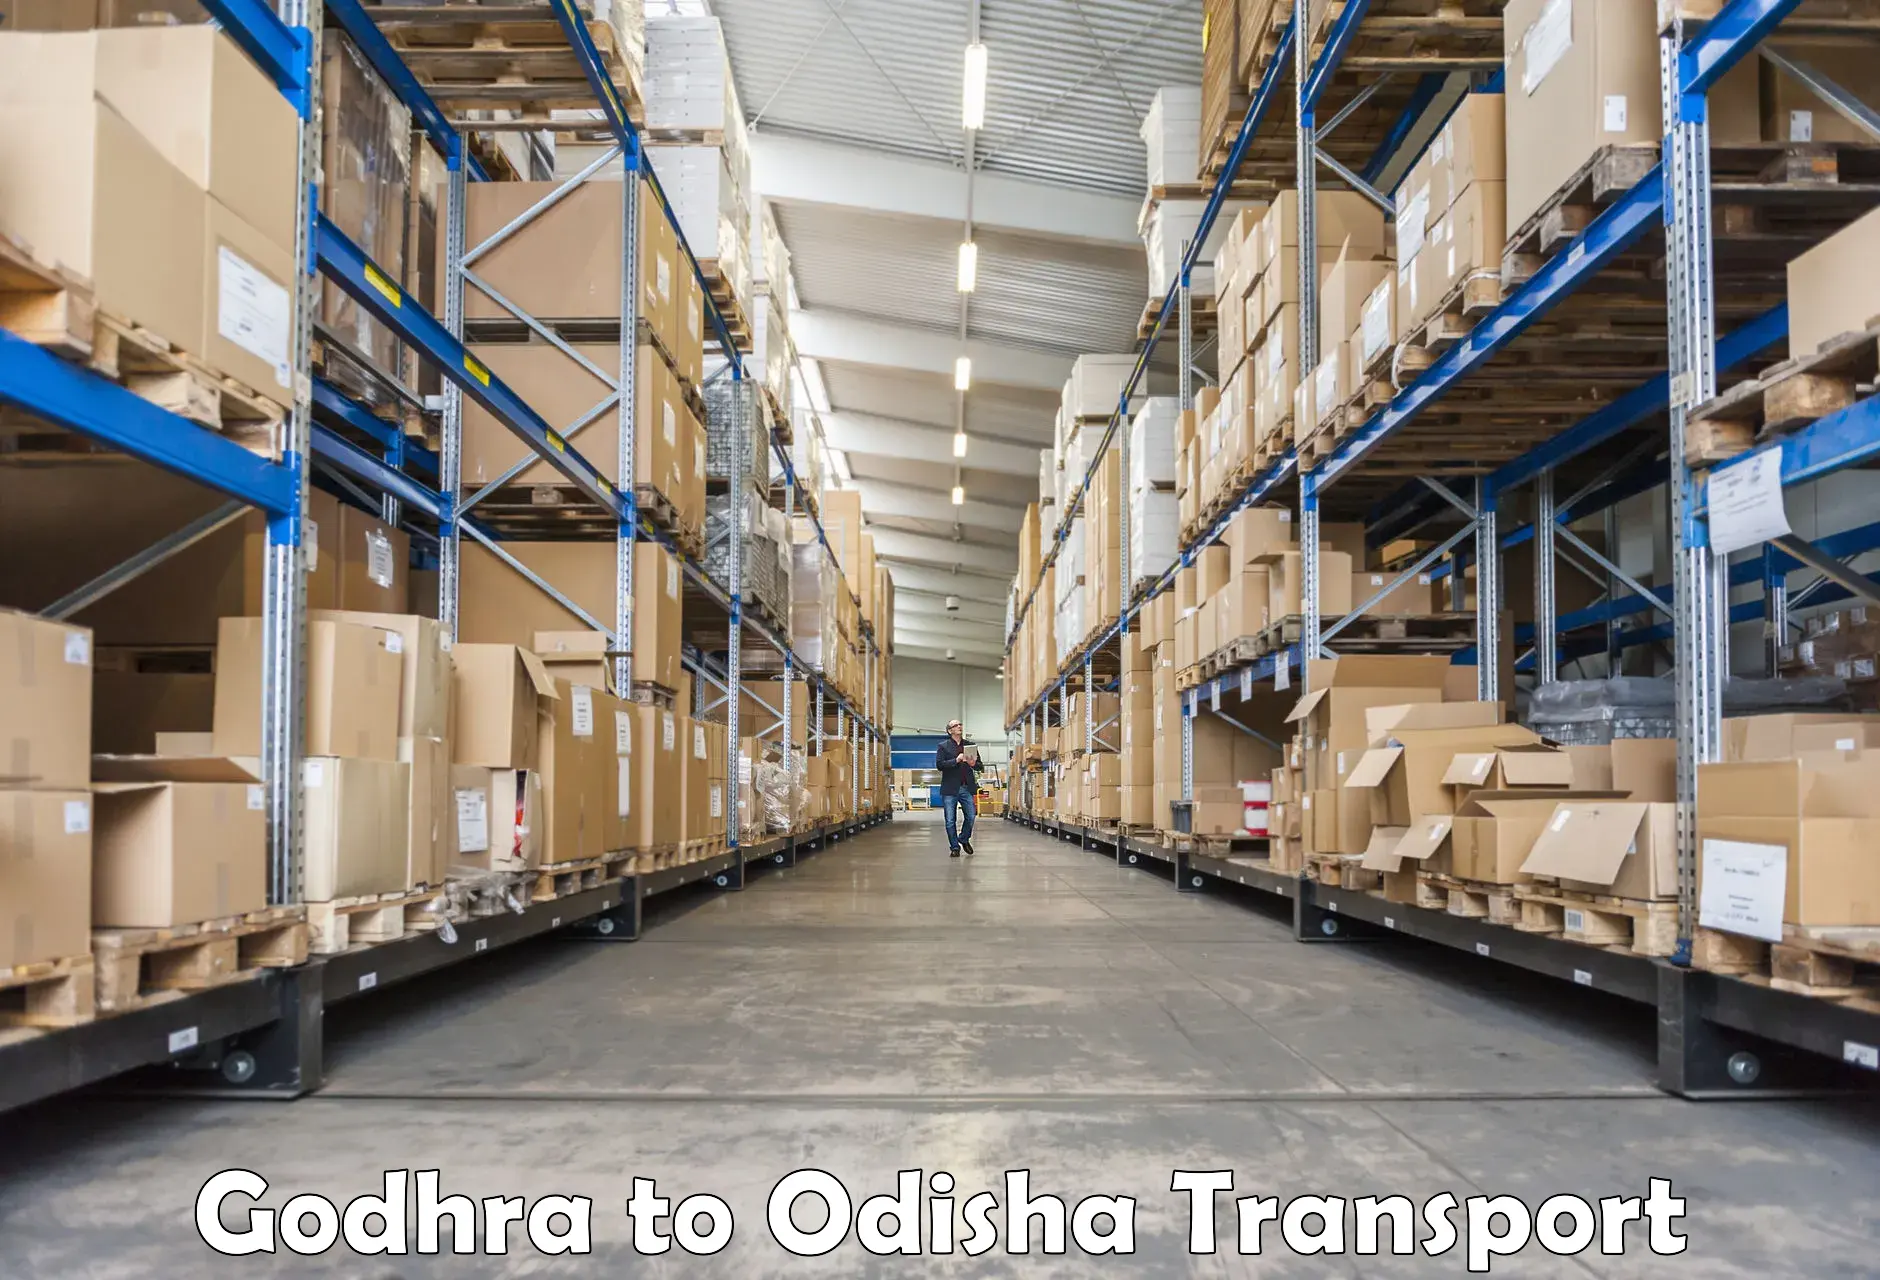 Delivery service Godhra to Gajapati